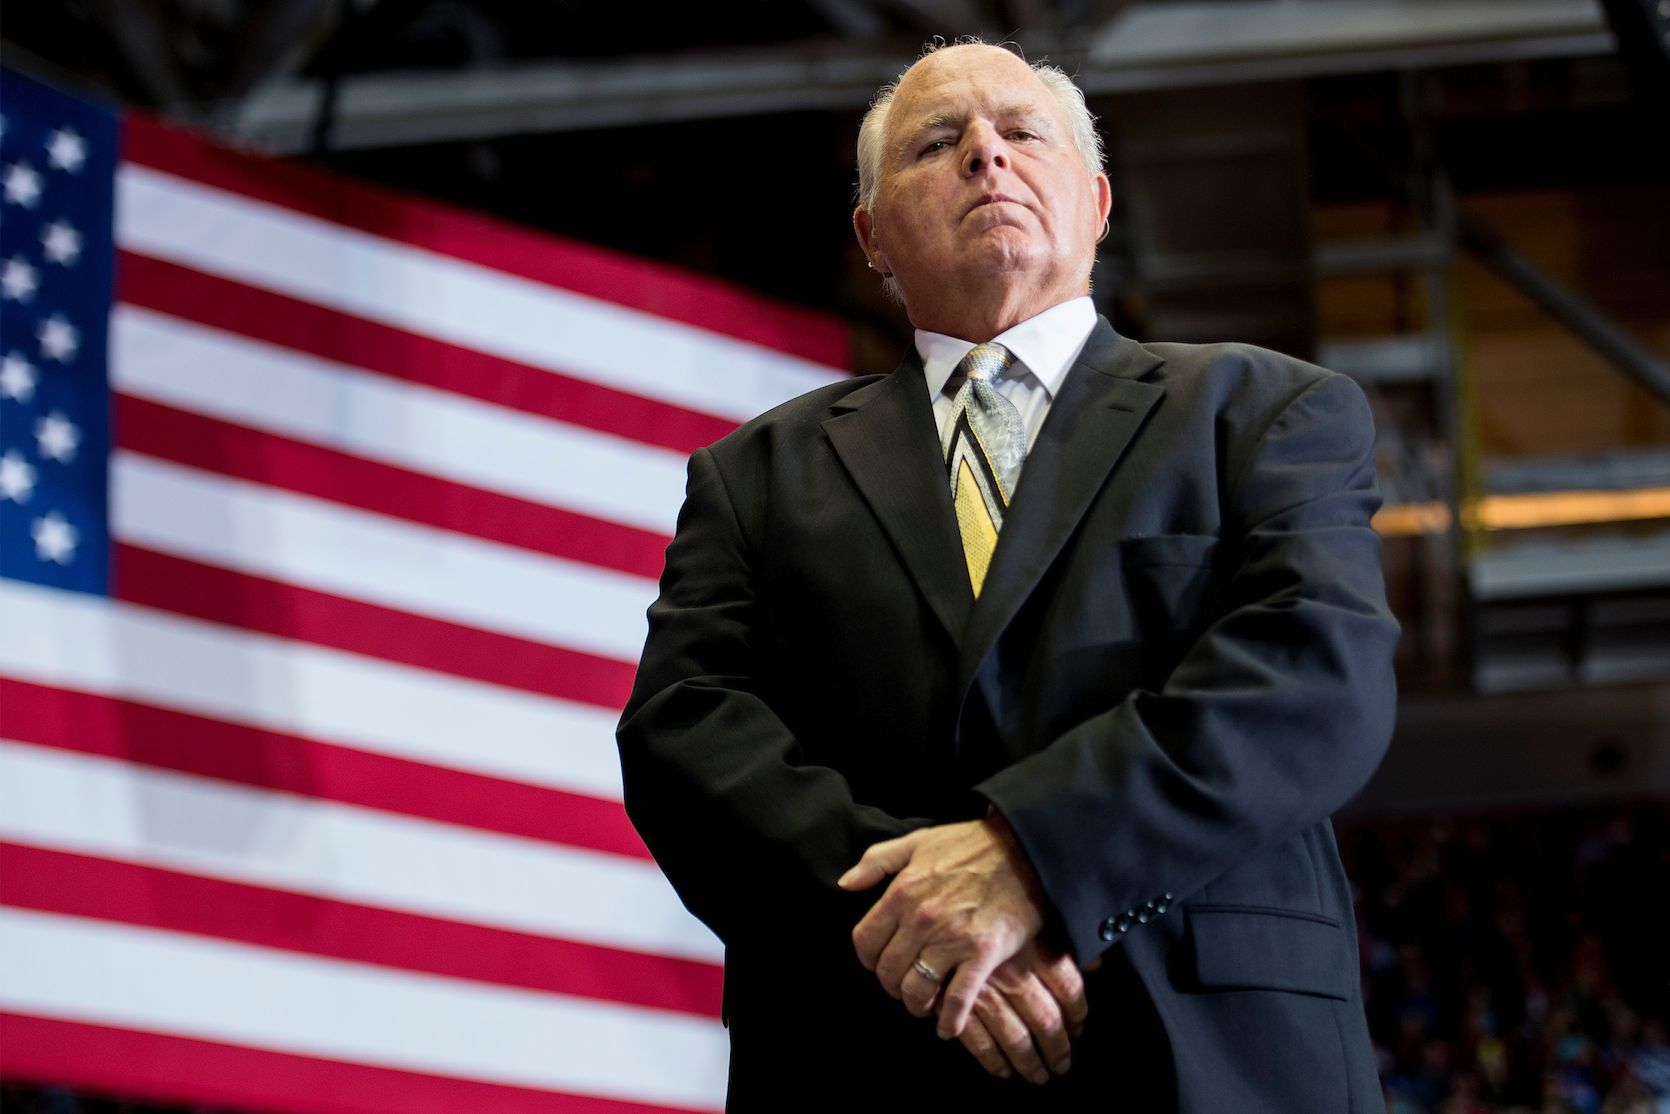 Rush Limbaugh standing in front of an American flag